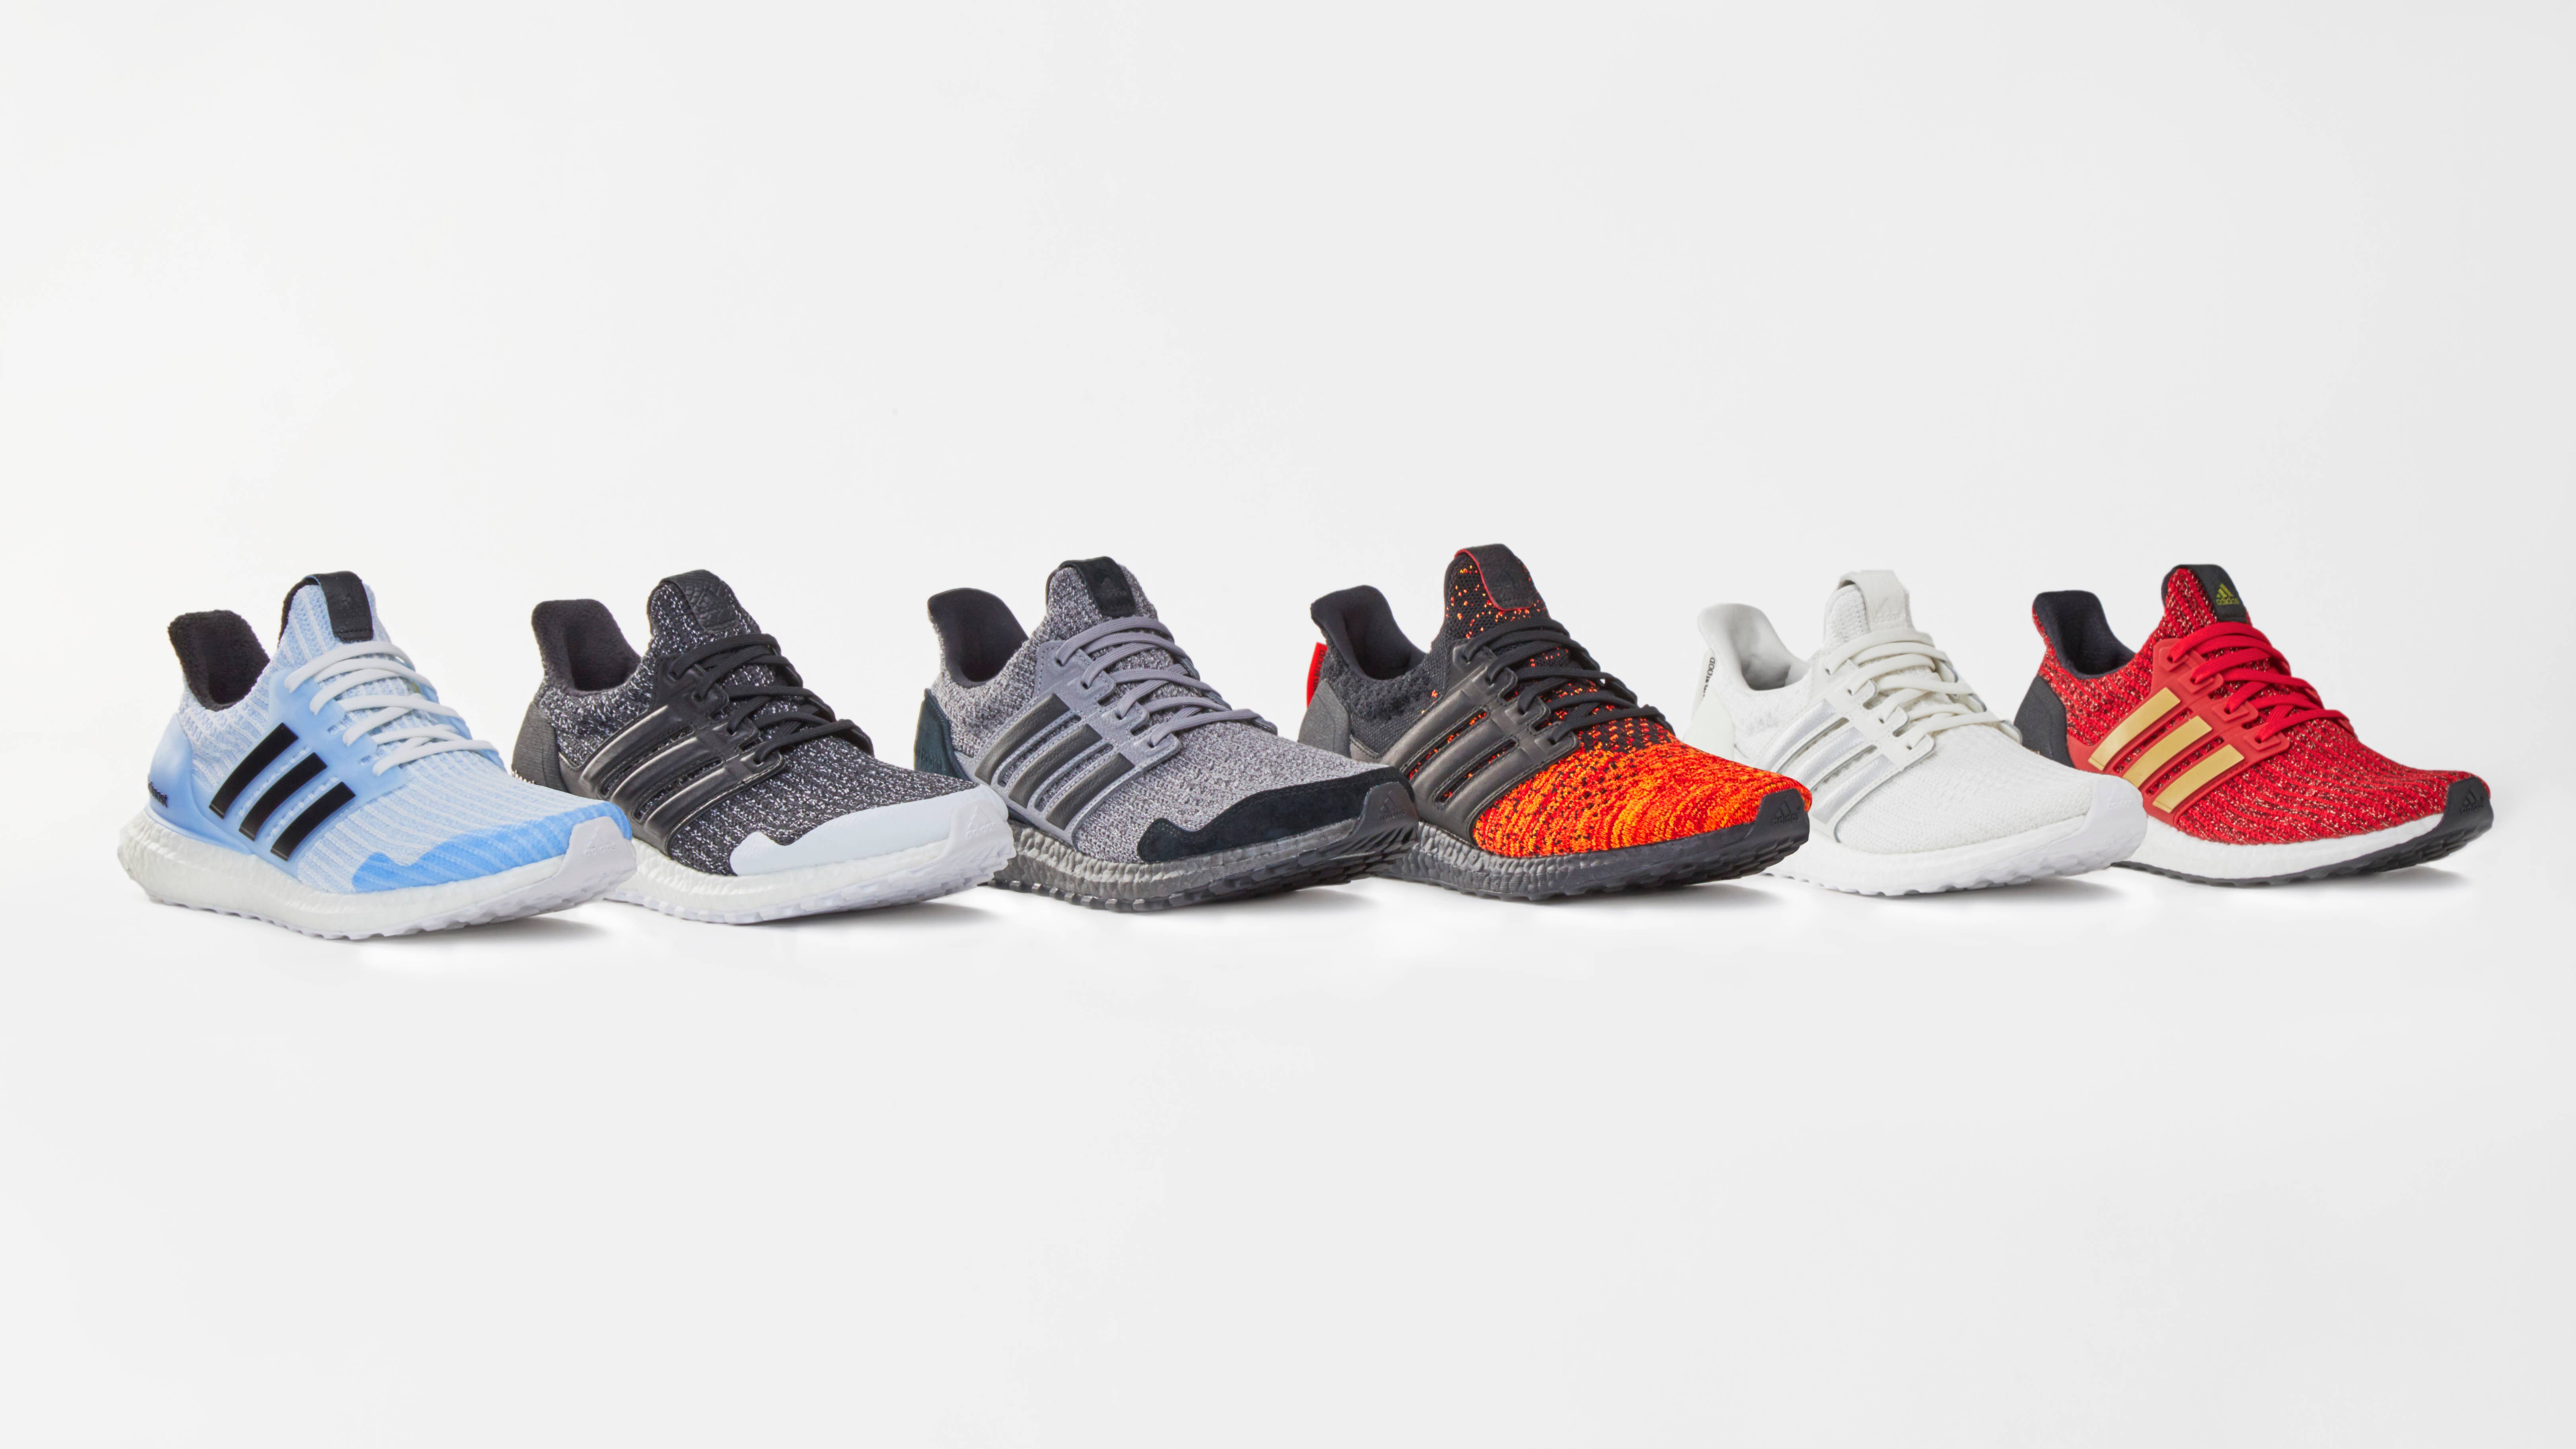 'Game of Thrones' x Adidas Ultra Boost Collection